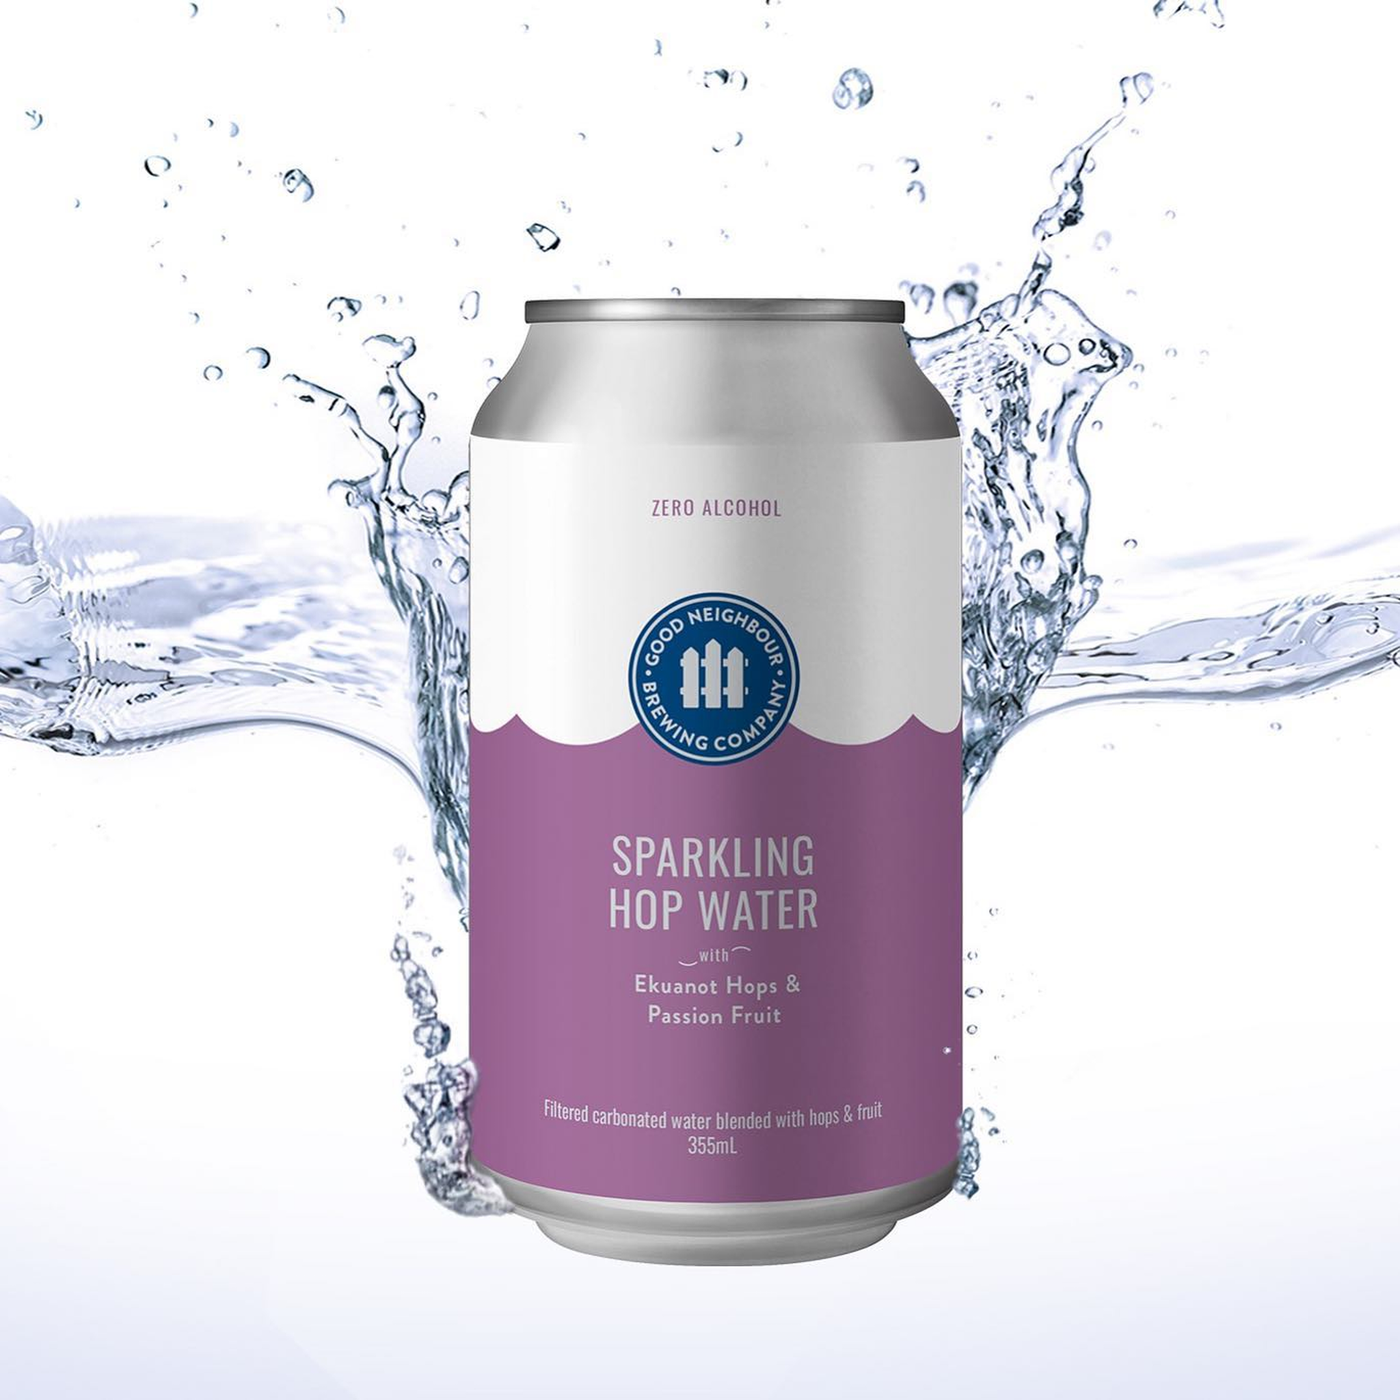 Passionfruit Ekuanot hop water - adult beverages without alcohol that taste great Canada USA sparkling hop water Canada - refreshing alcohol free beverage - great tasting carbonated beverage